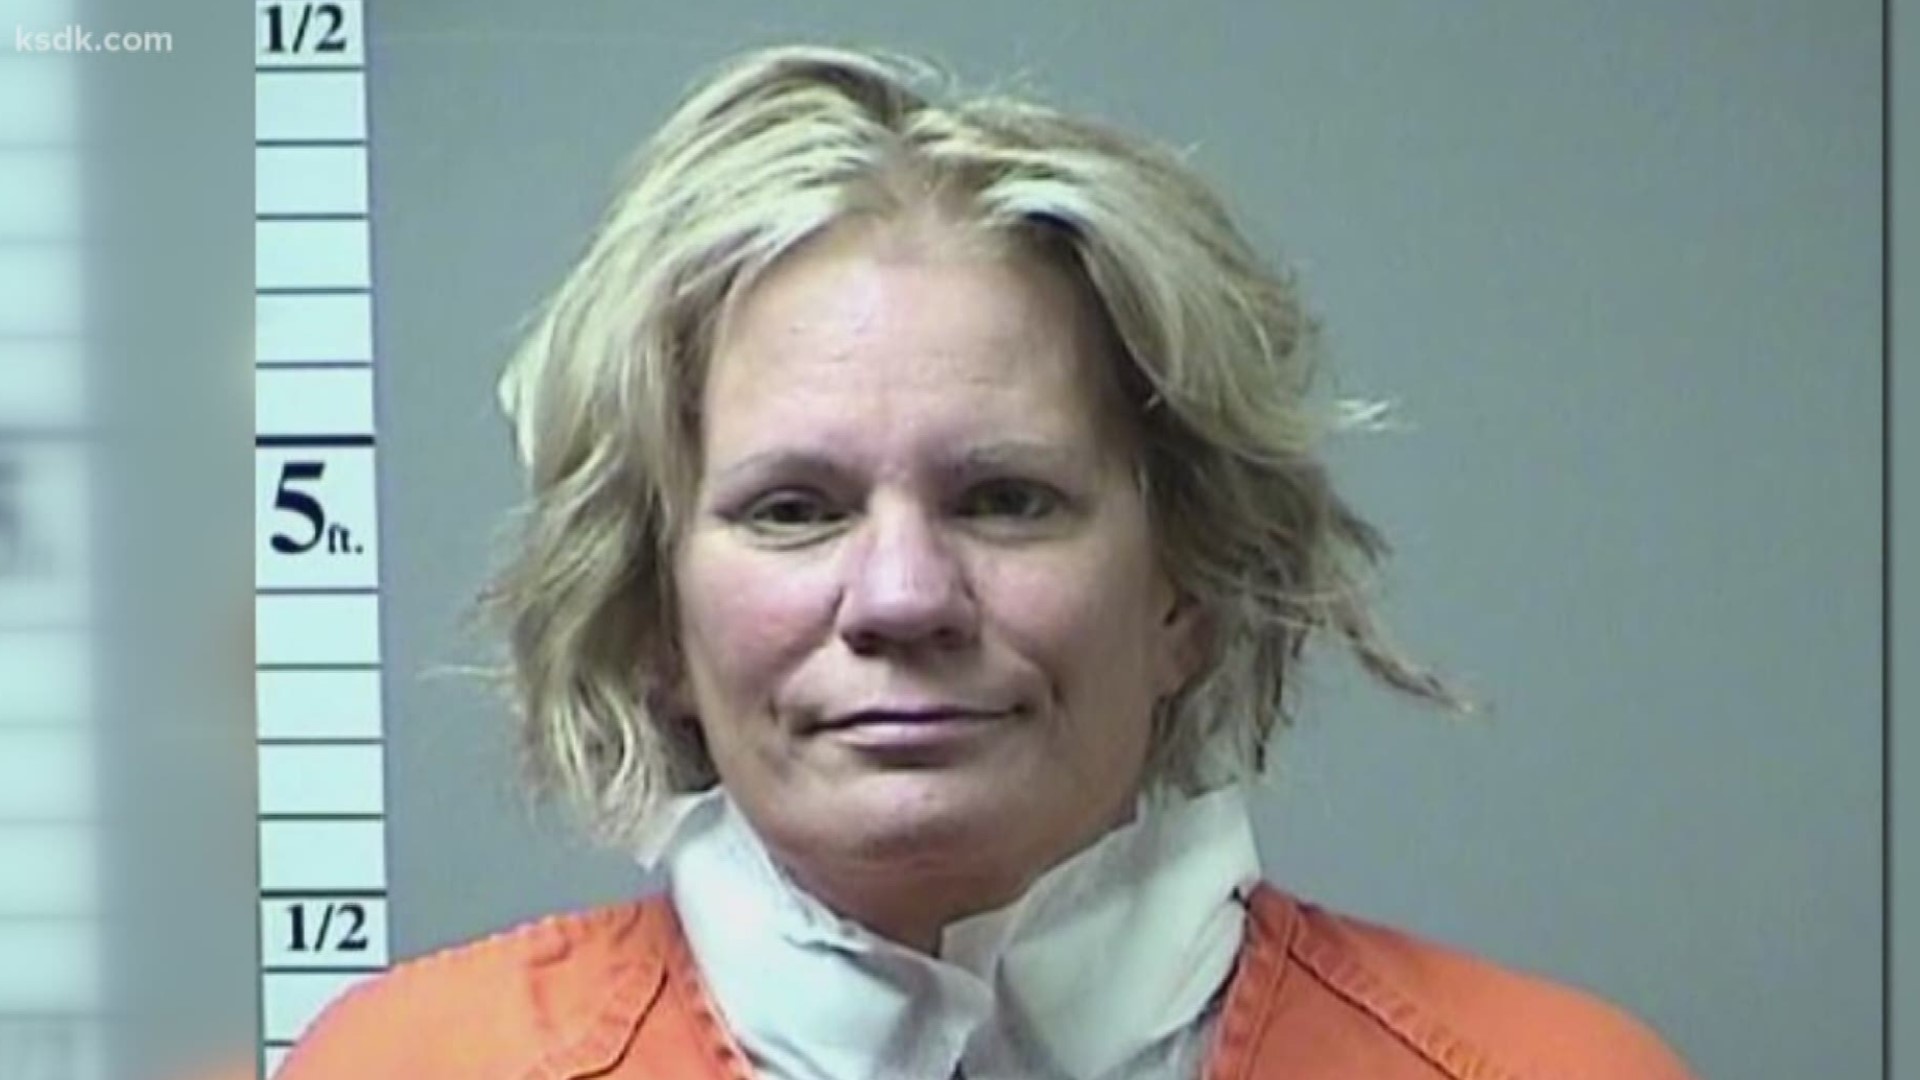 Hupp entered an Alford plea in court. An Alford plea means she accepts the fact that the state had enough evidence to convict her of the murder of Gumpenberger.